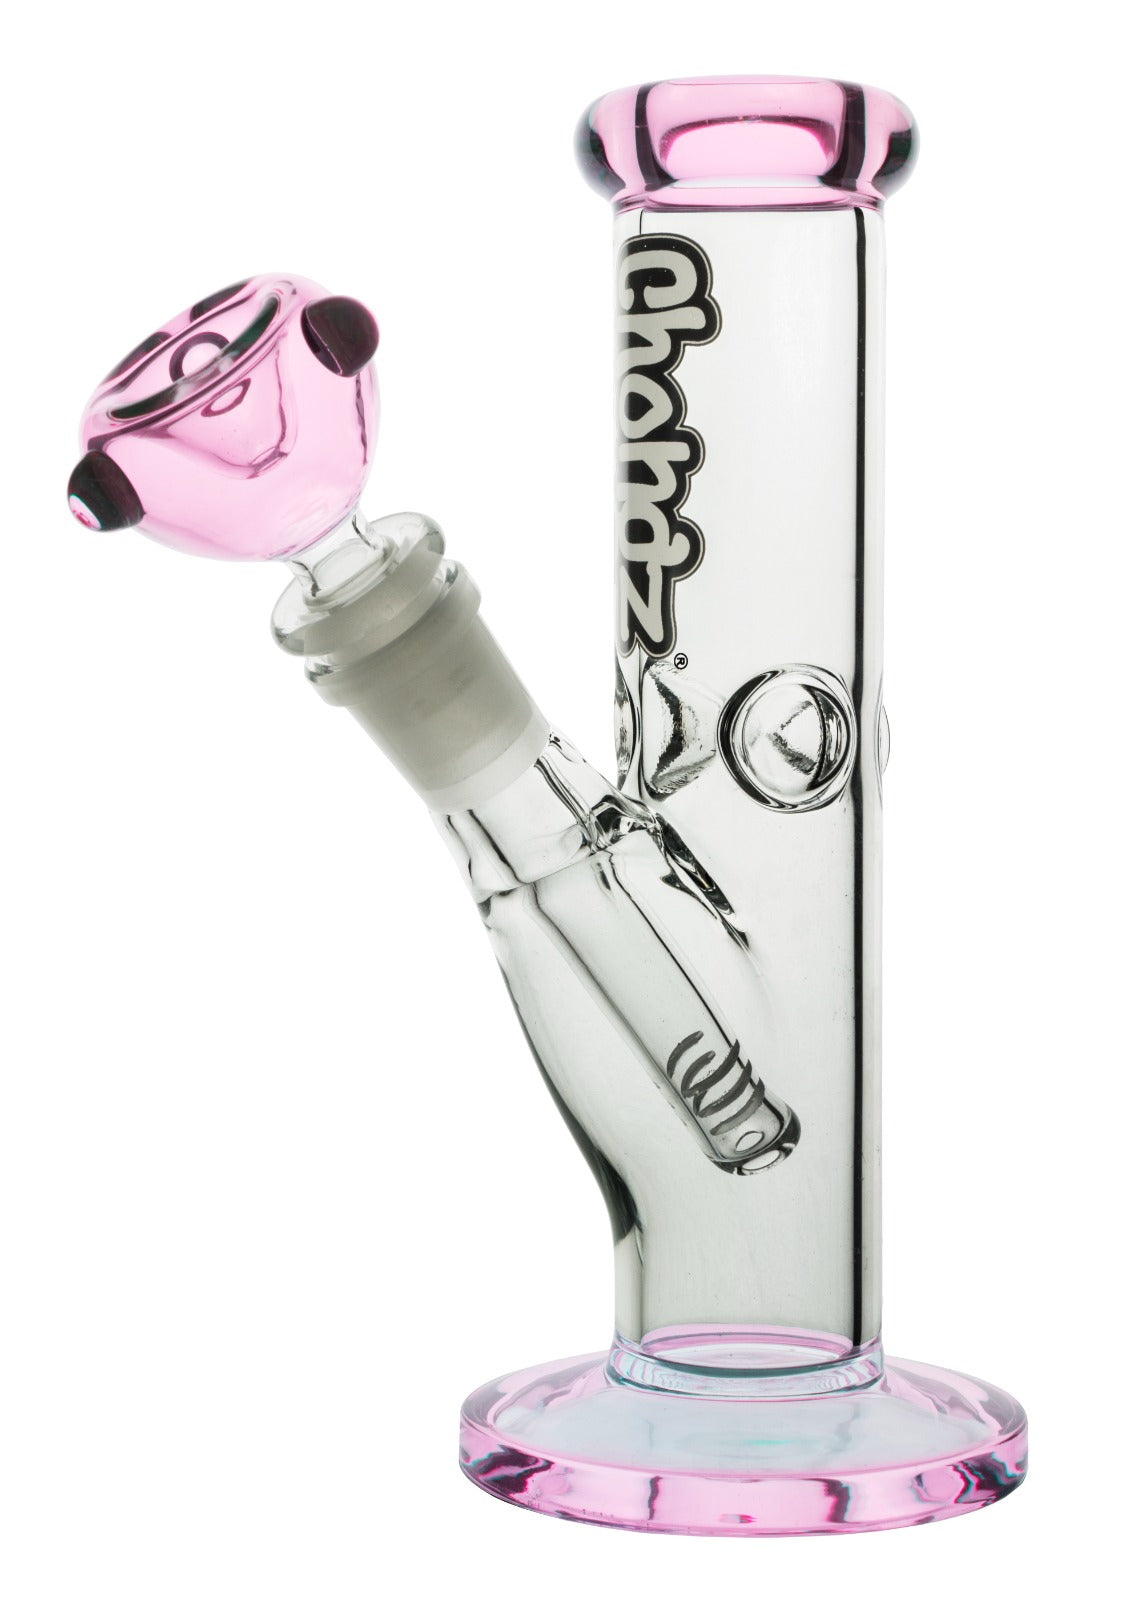 GLASS Chongz "Bozo" 21cm Ice with Pink Accents